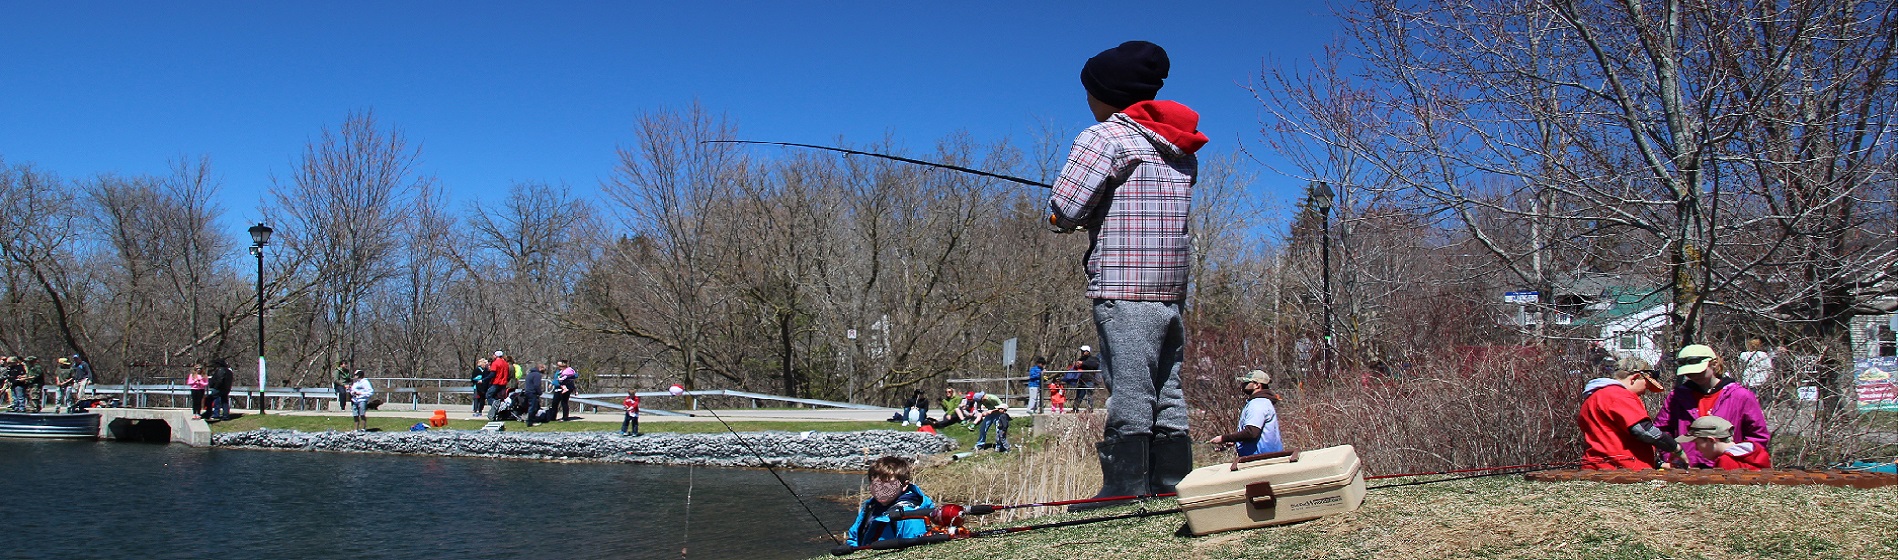 youngsters fishing during huck finn